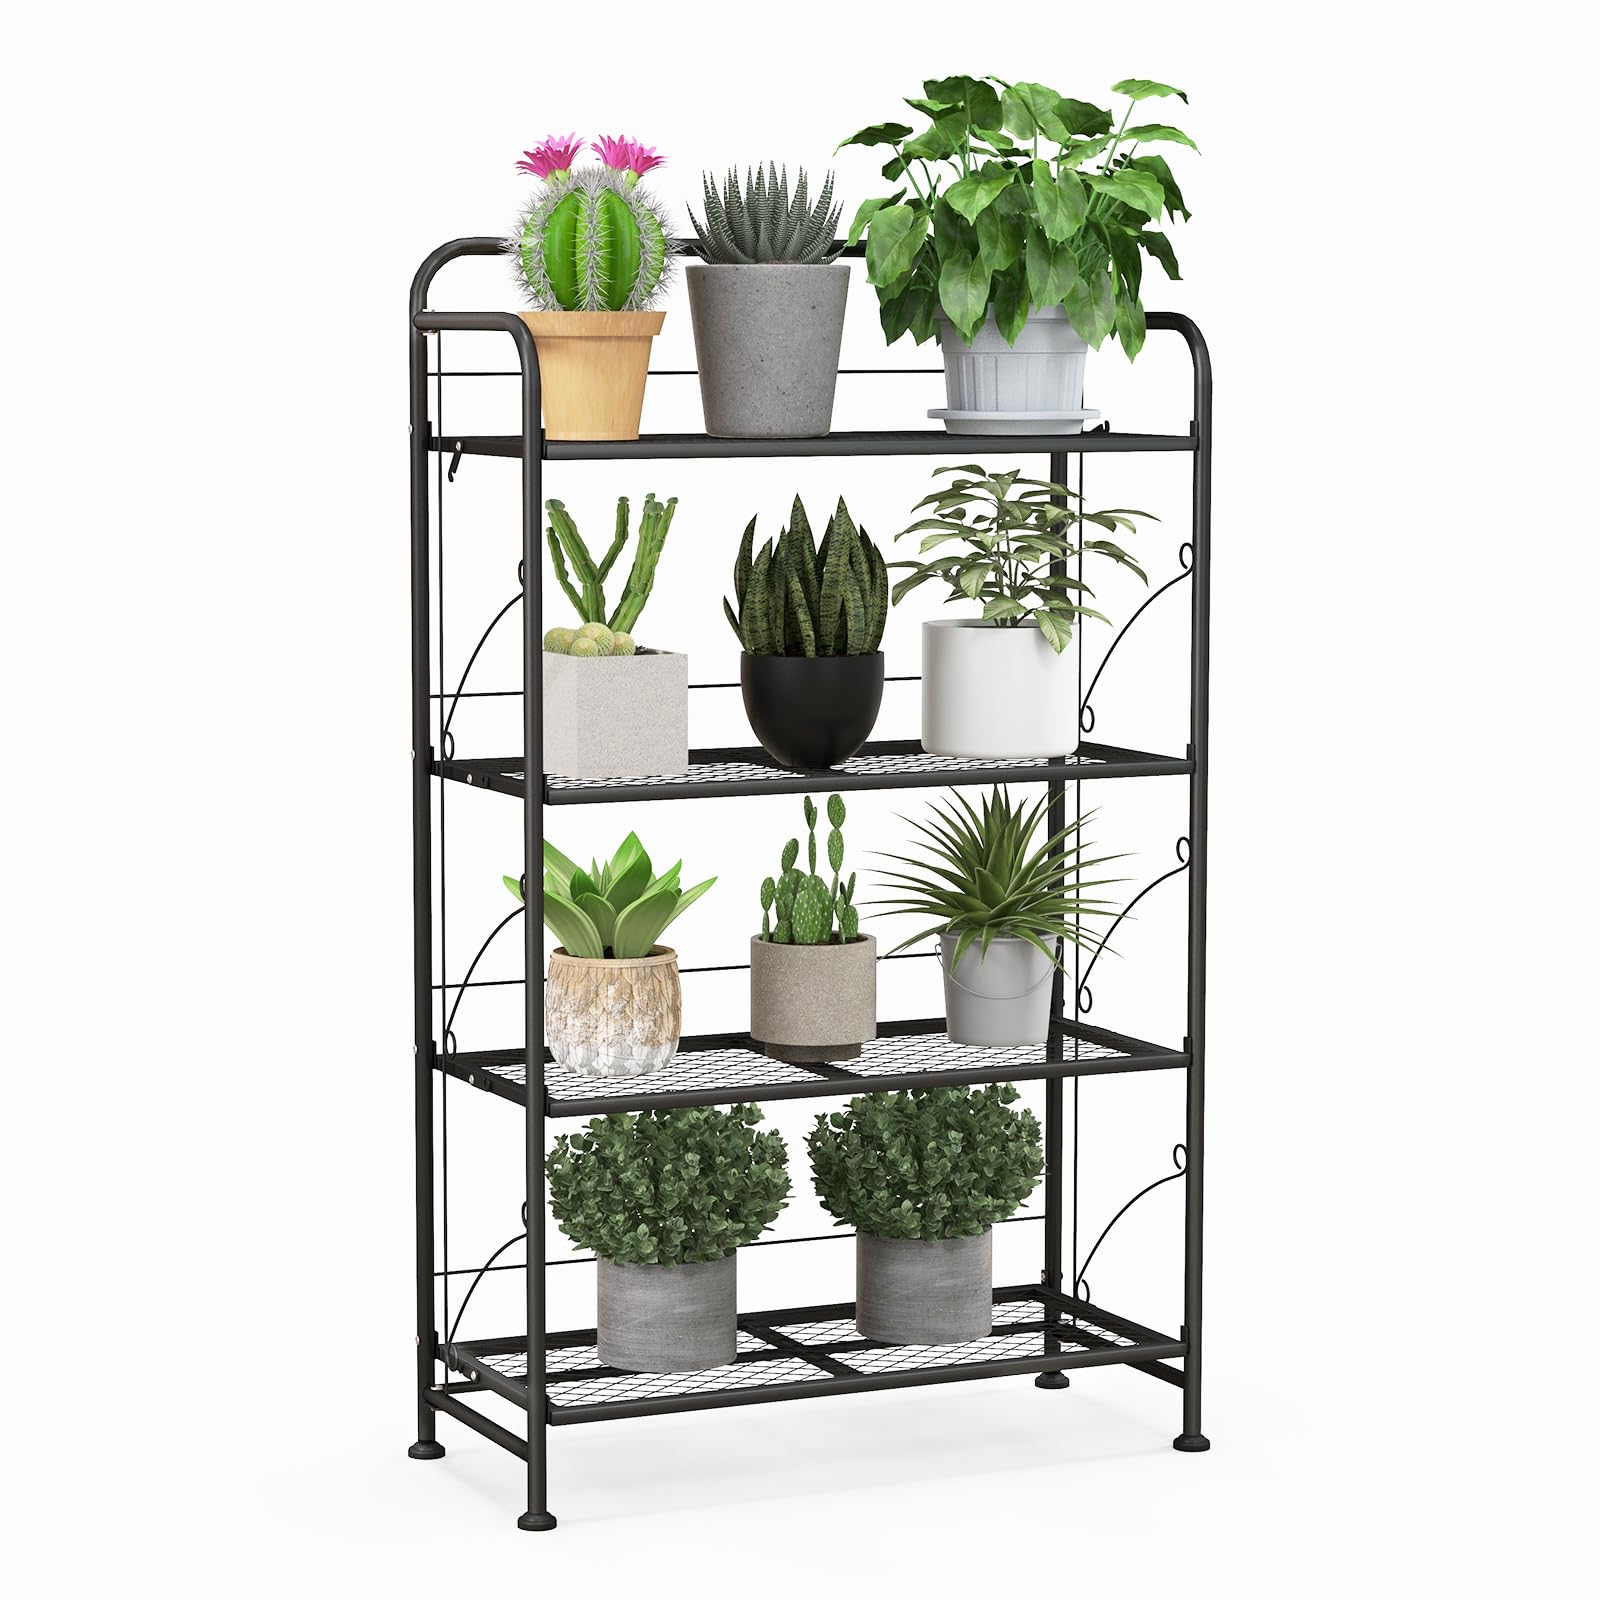 Giantex Folding Plant Stand, 4-Tires Collapsible Plant Rack with Adjustable Shelf, Black